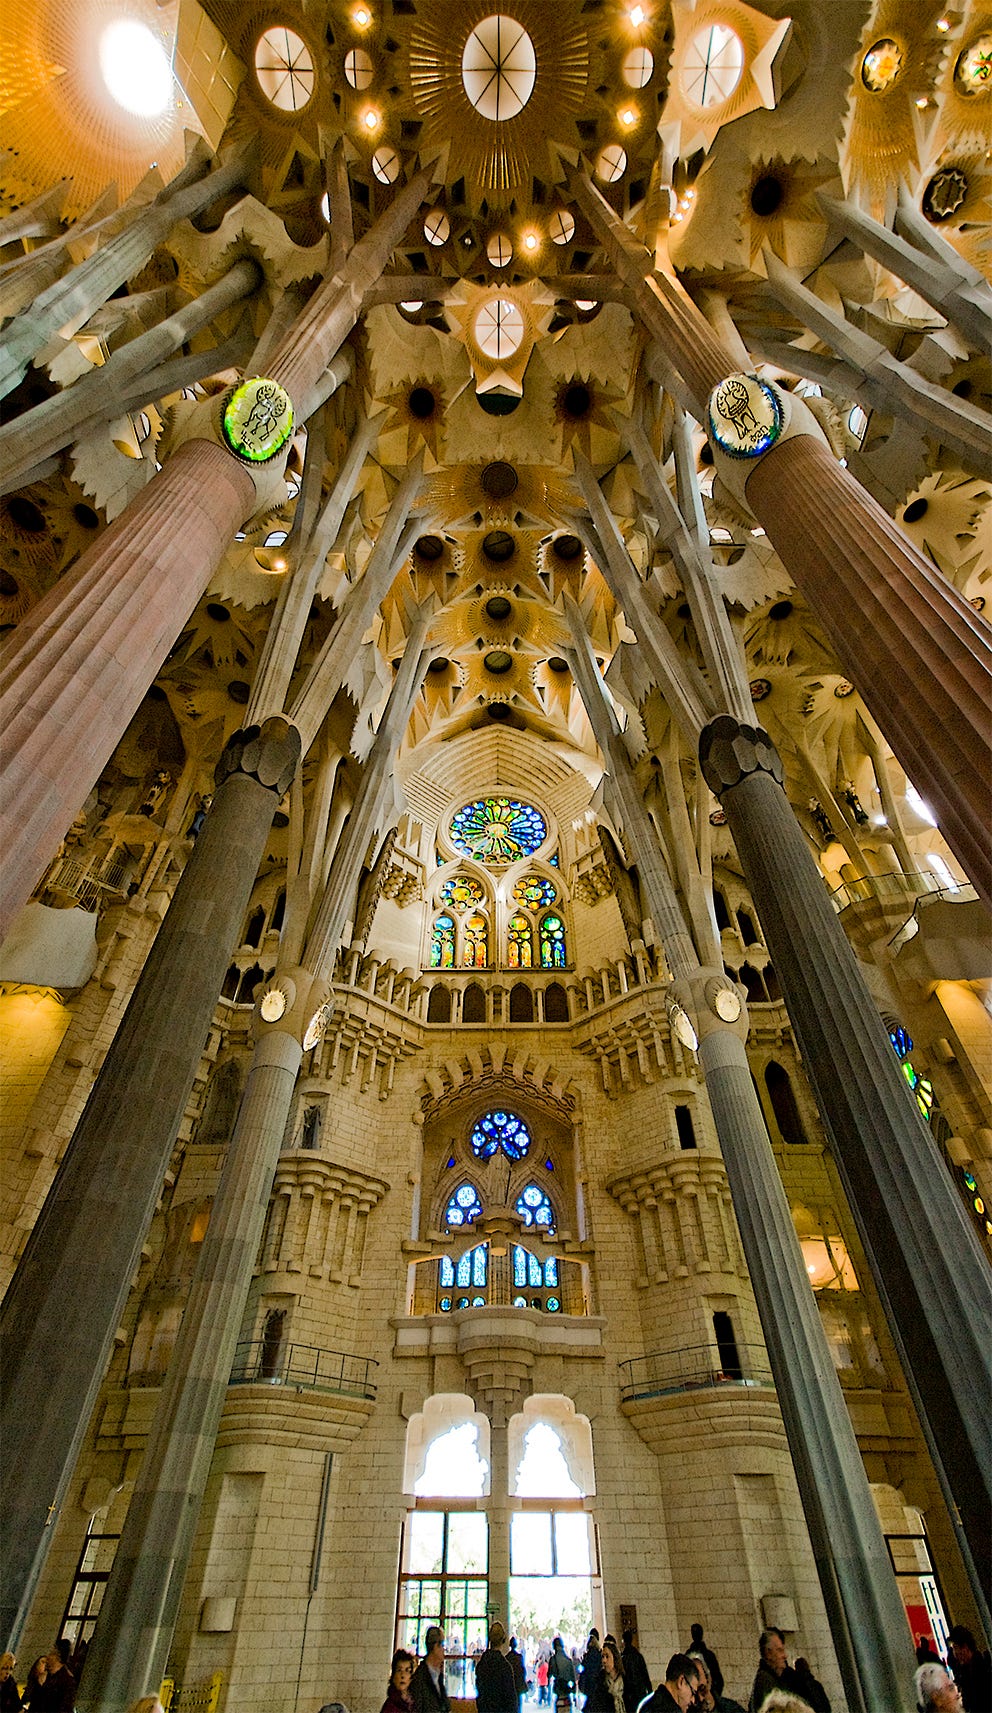 The inside of the Sagrada Família, complete with impressive stone structures and stained glass.